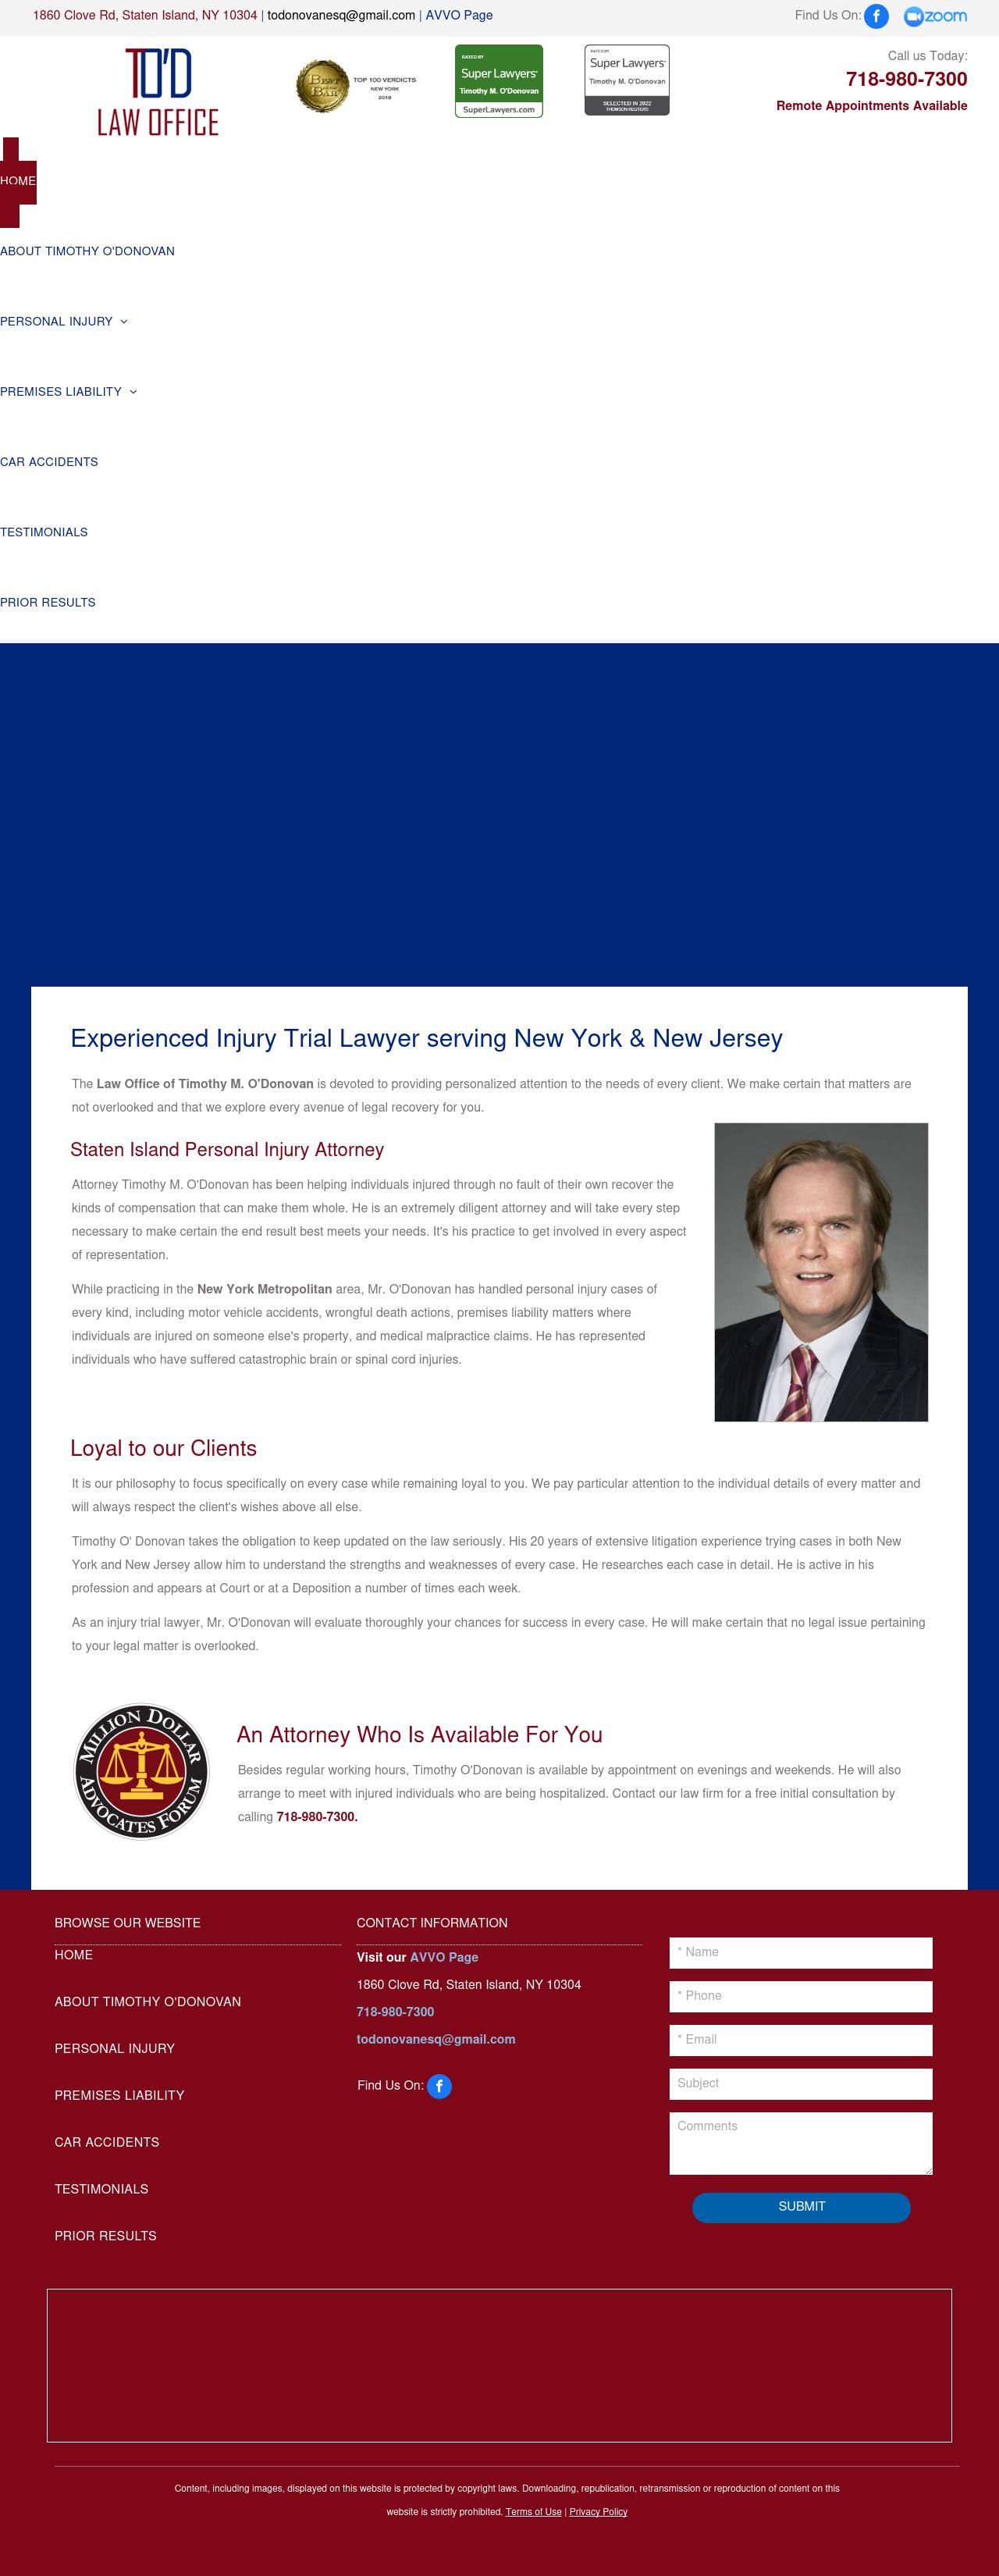 Law Office of Timothy M. O'Donovan - Staten Island NY Lawyers